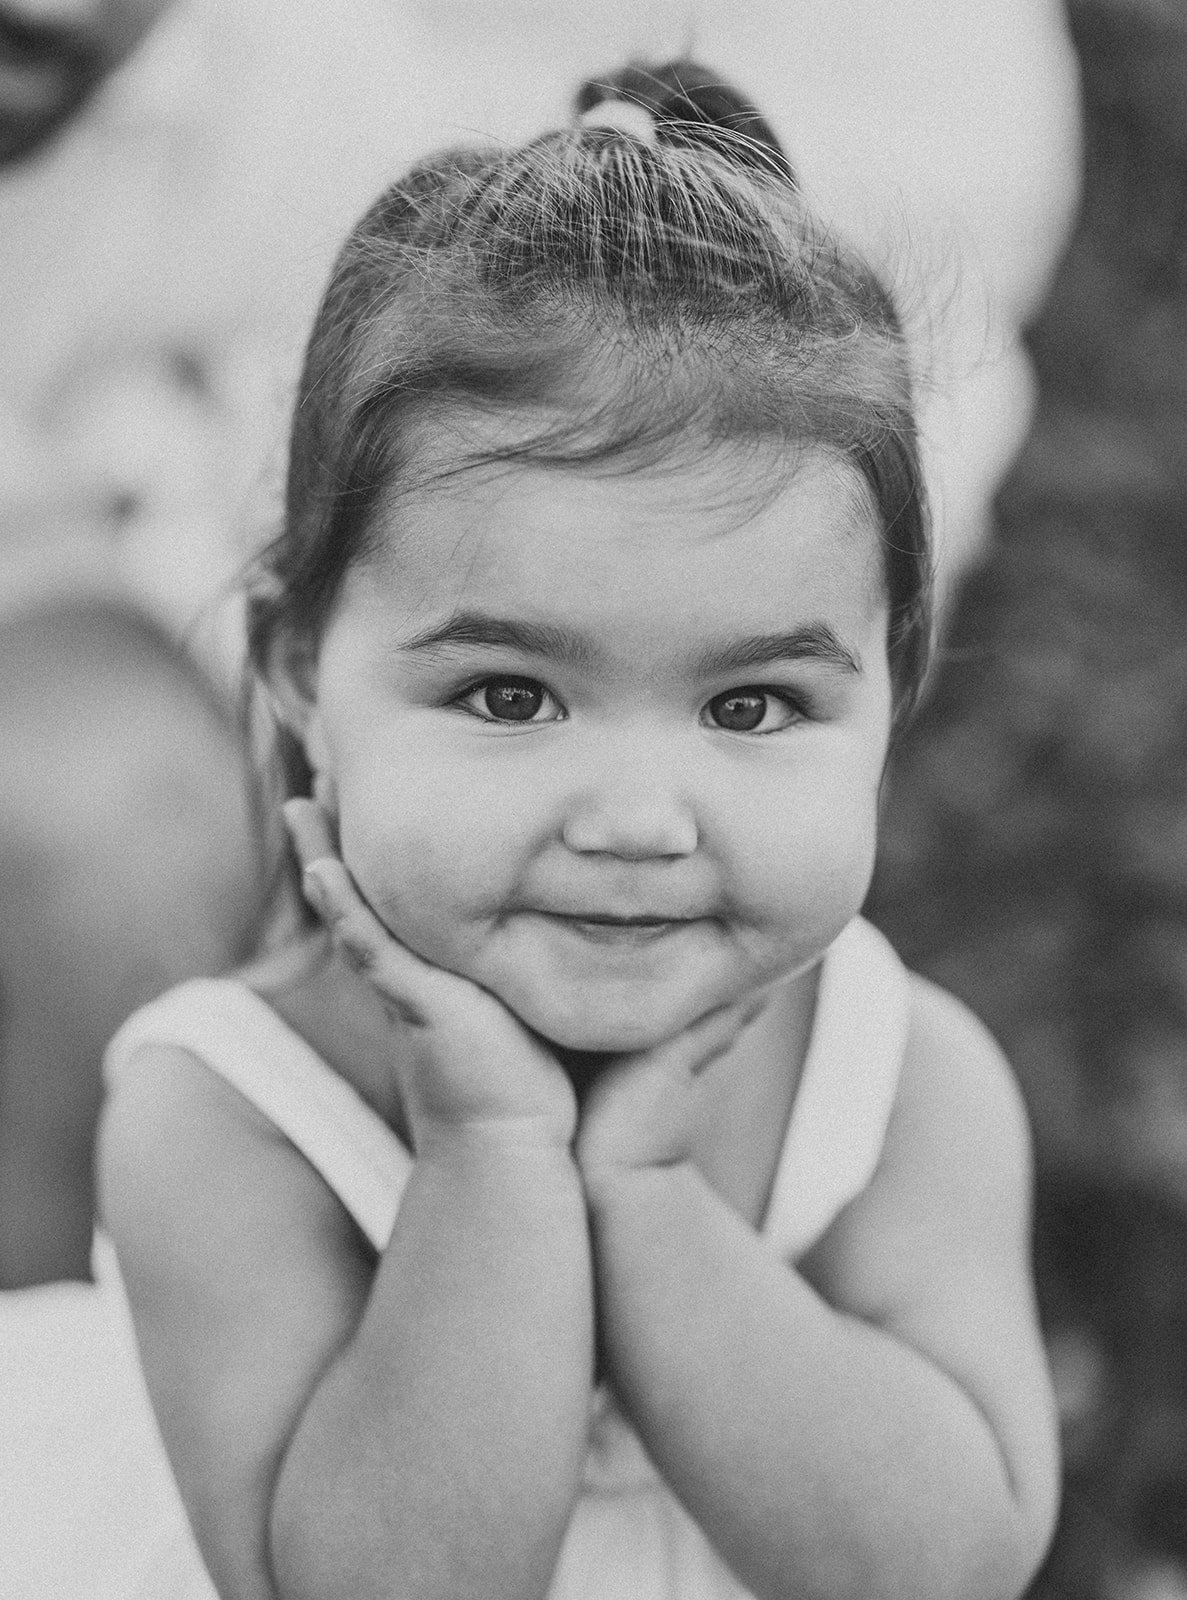 Blakc and white portrait of a little girl smiling at the camera